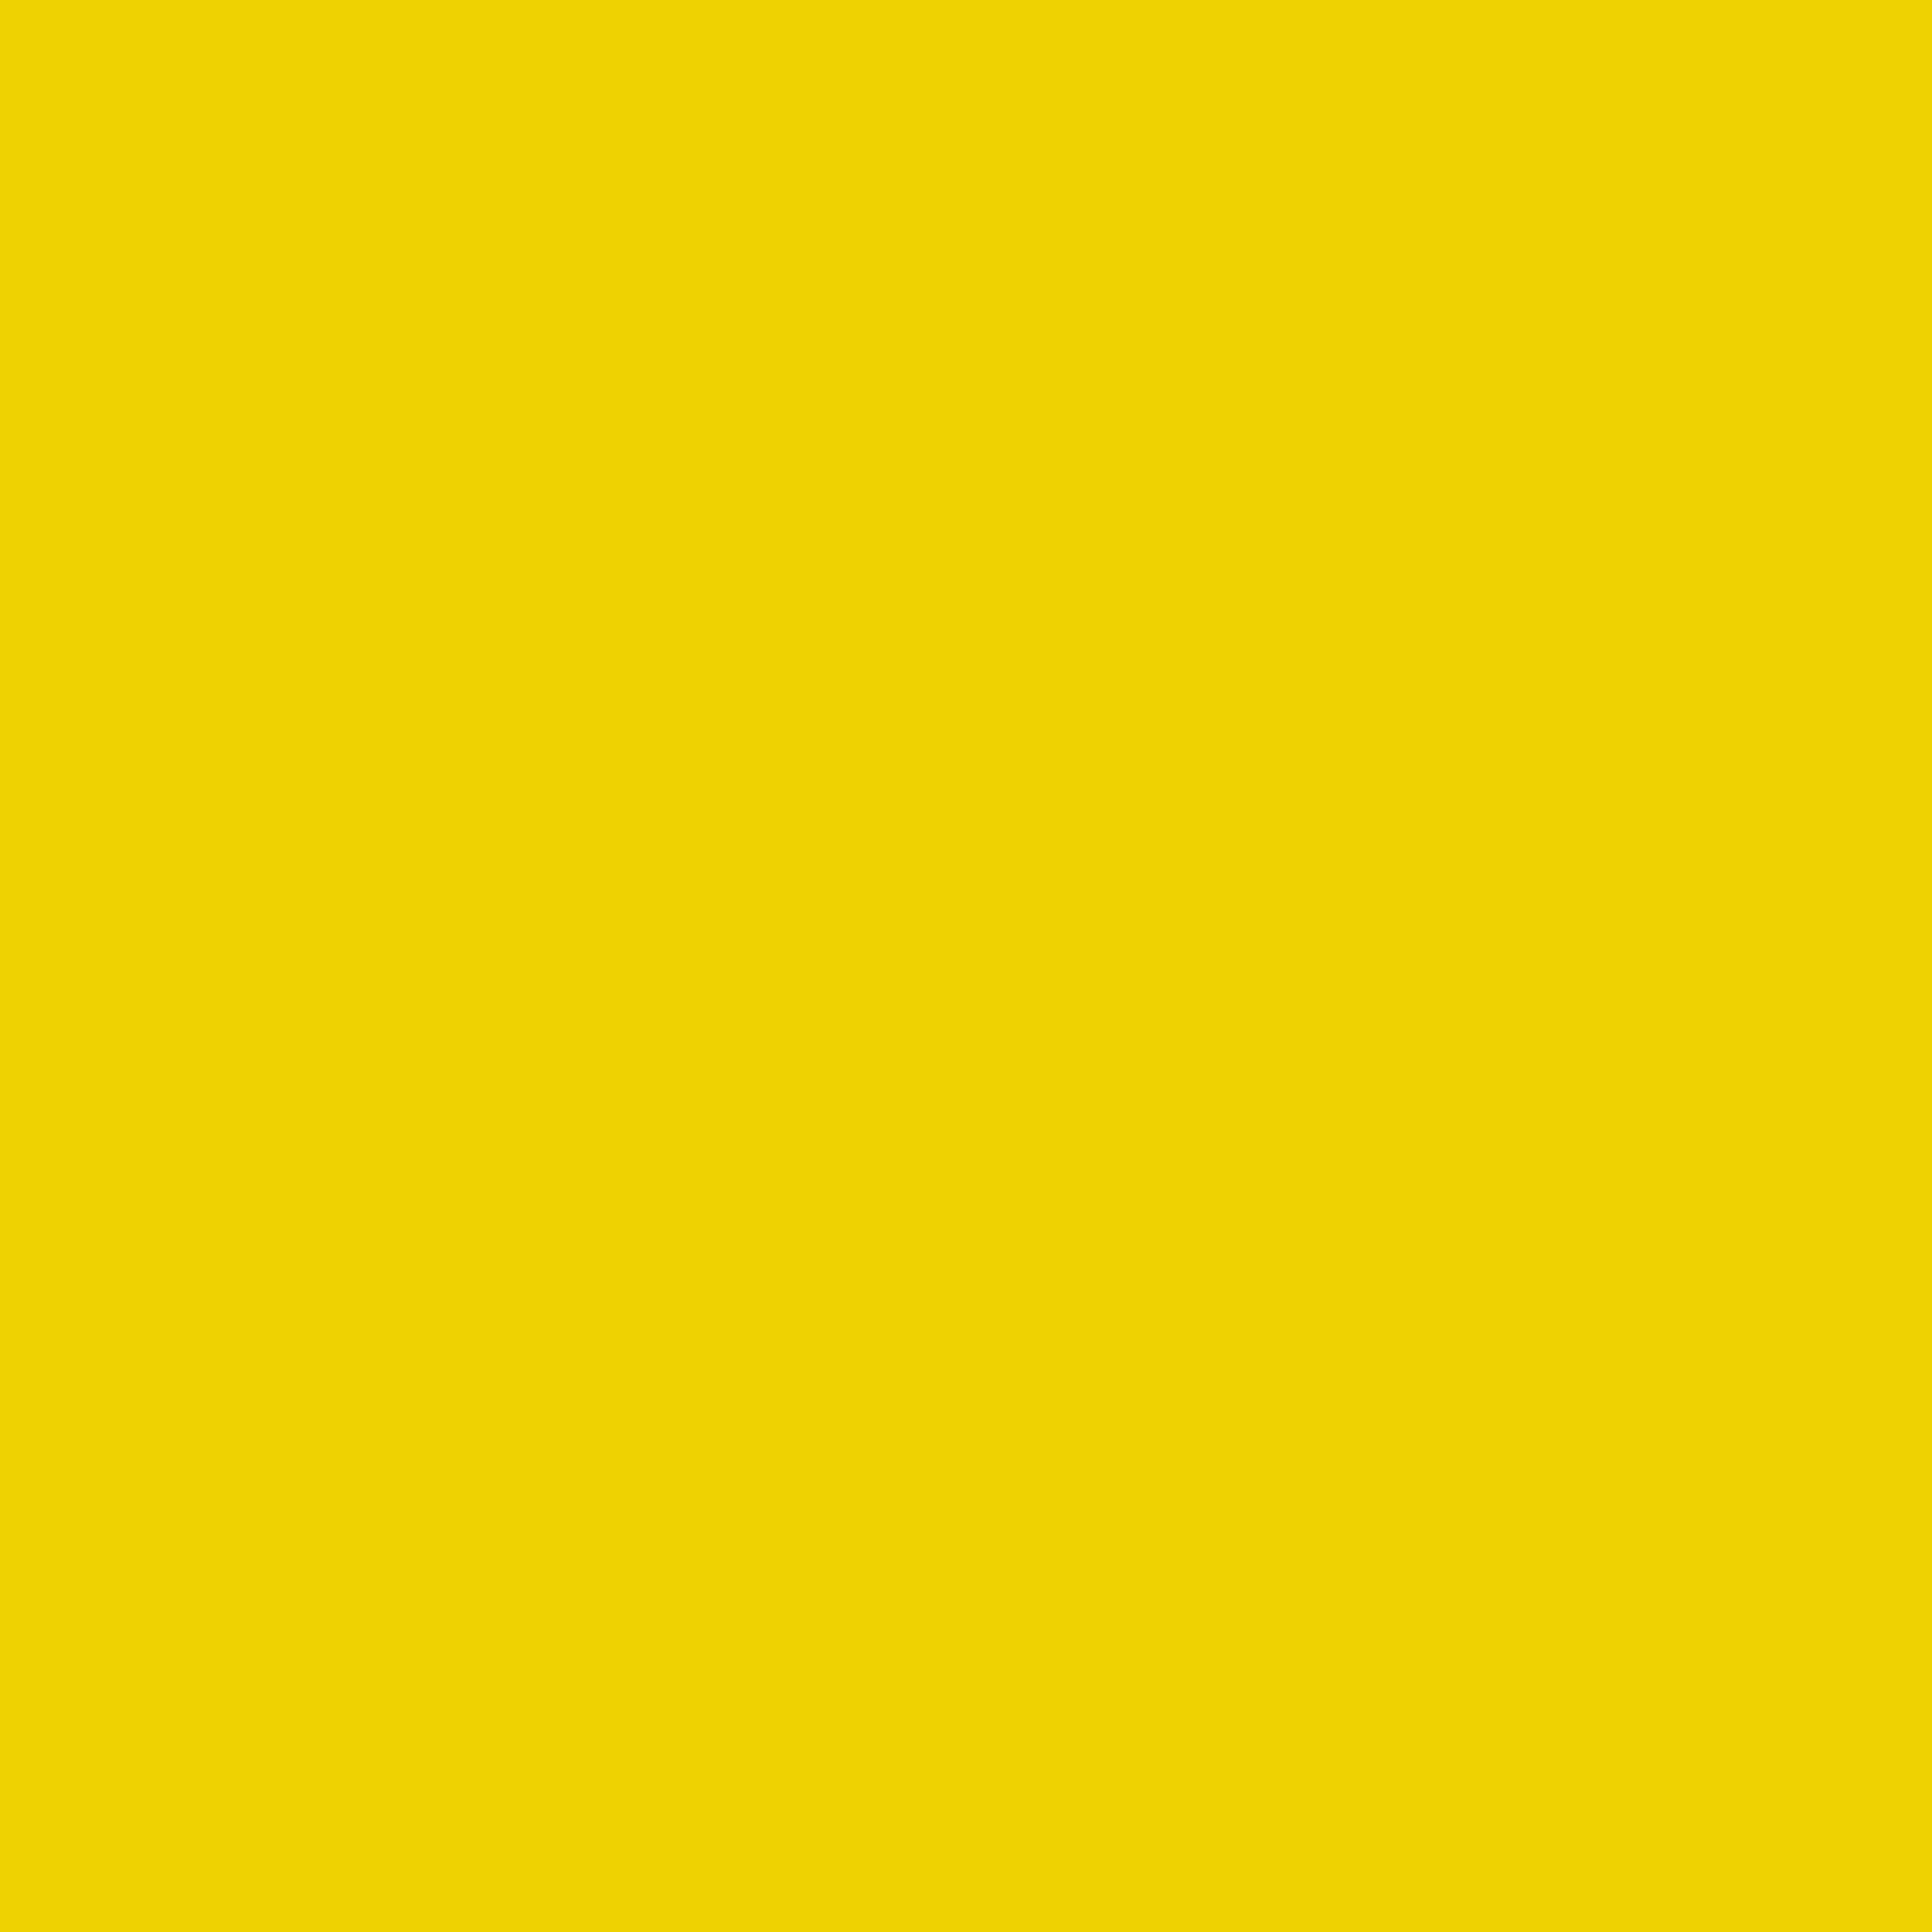 2732x2732 Safety Yellow Solid Color Background